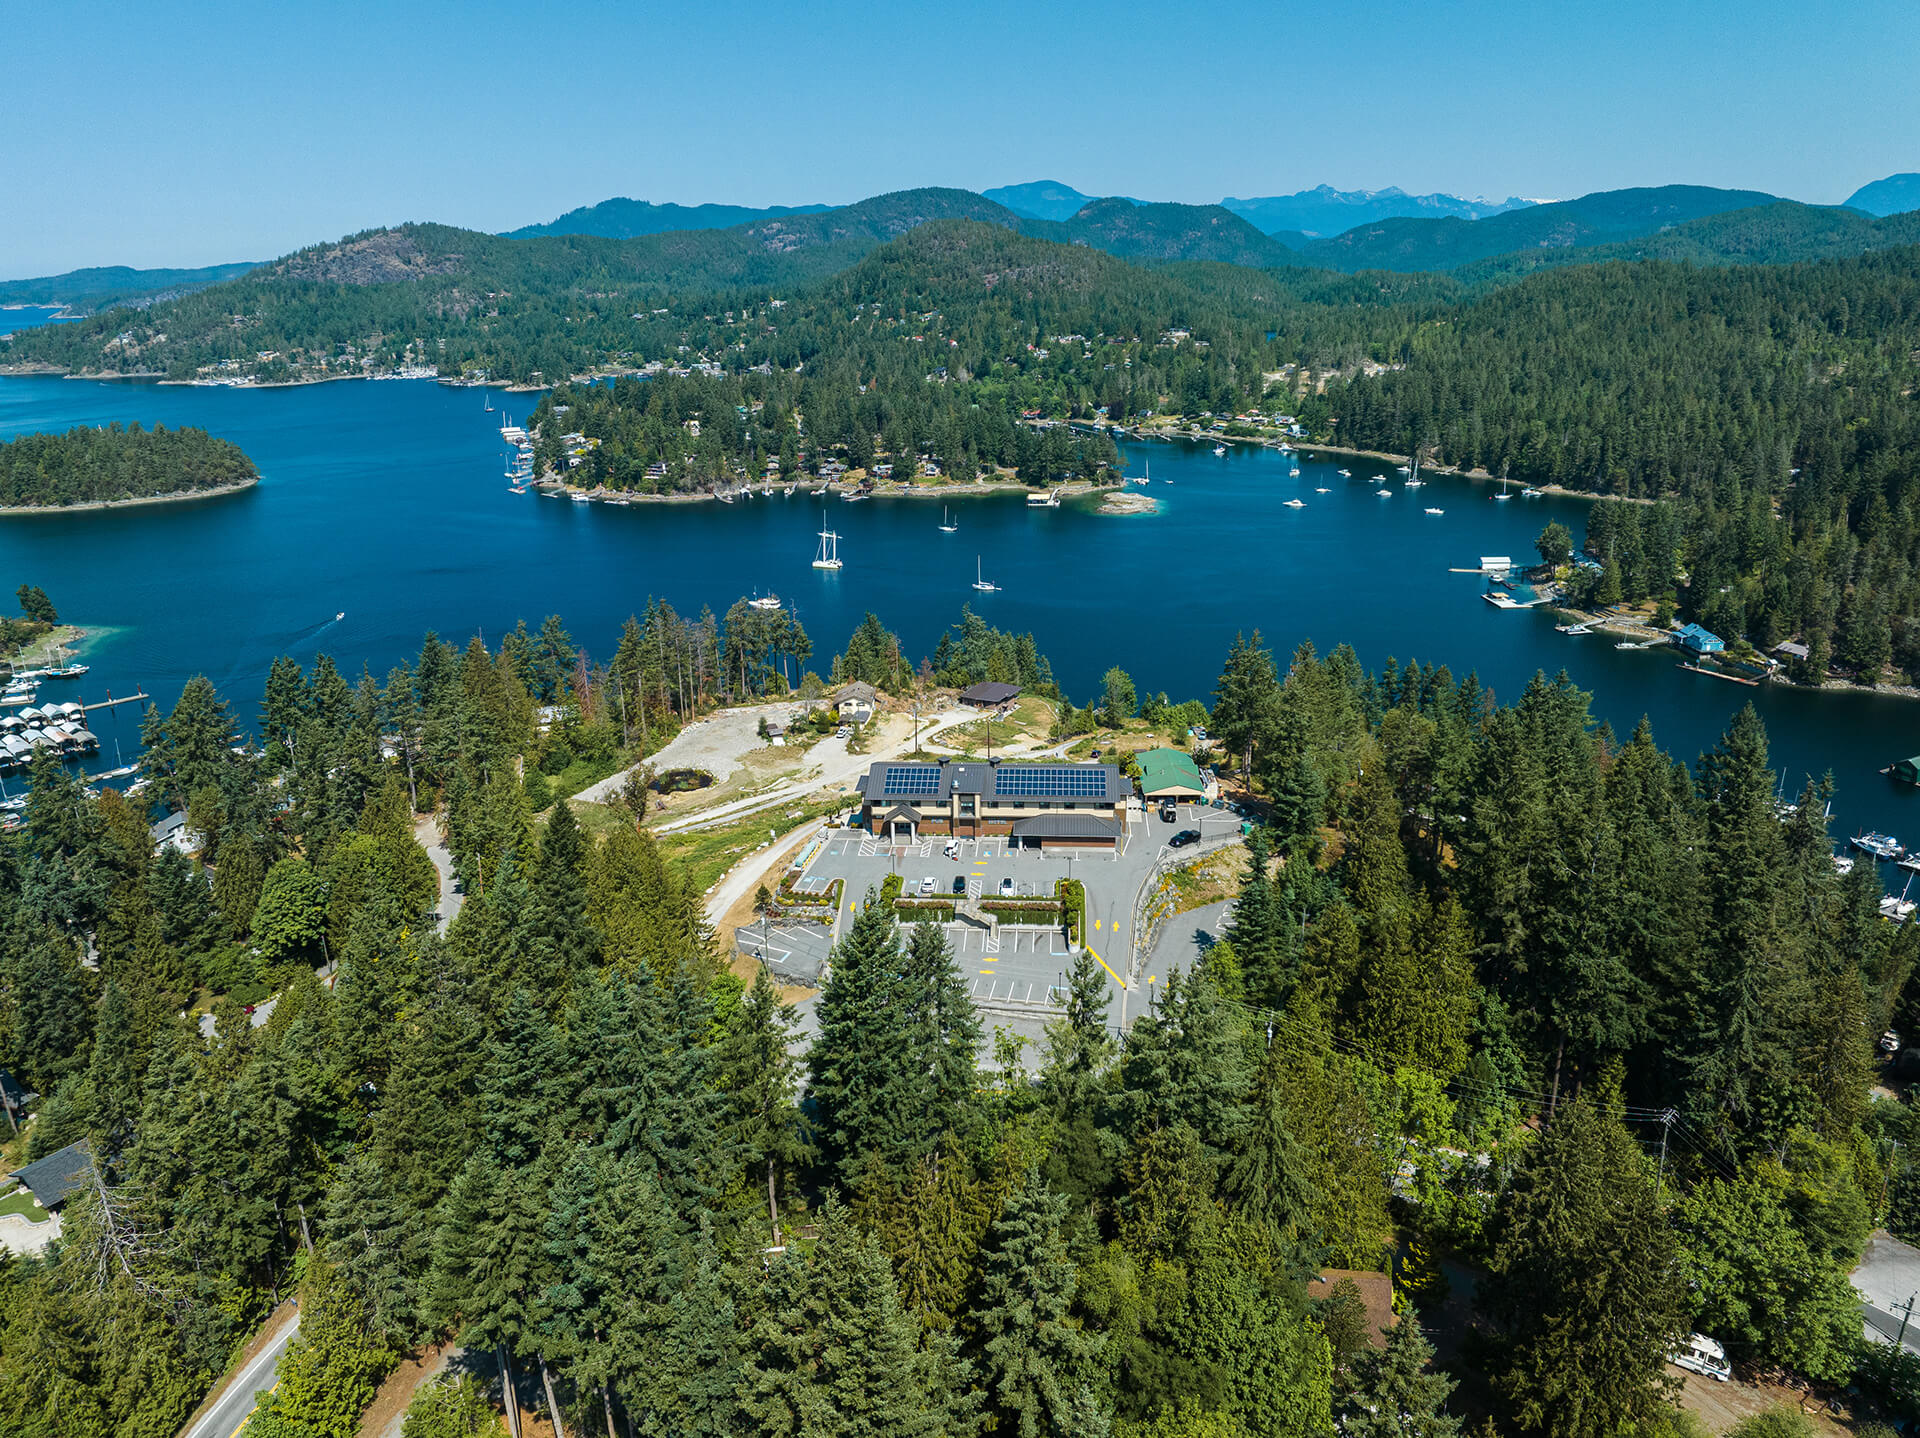 Pender Harbour Hotel and Marina Offered for Sale: A Unique Opportunity on the Sunshine Coast